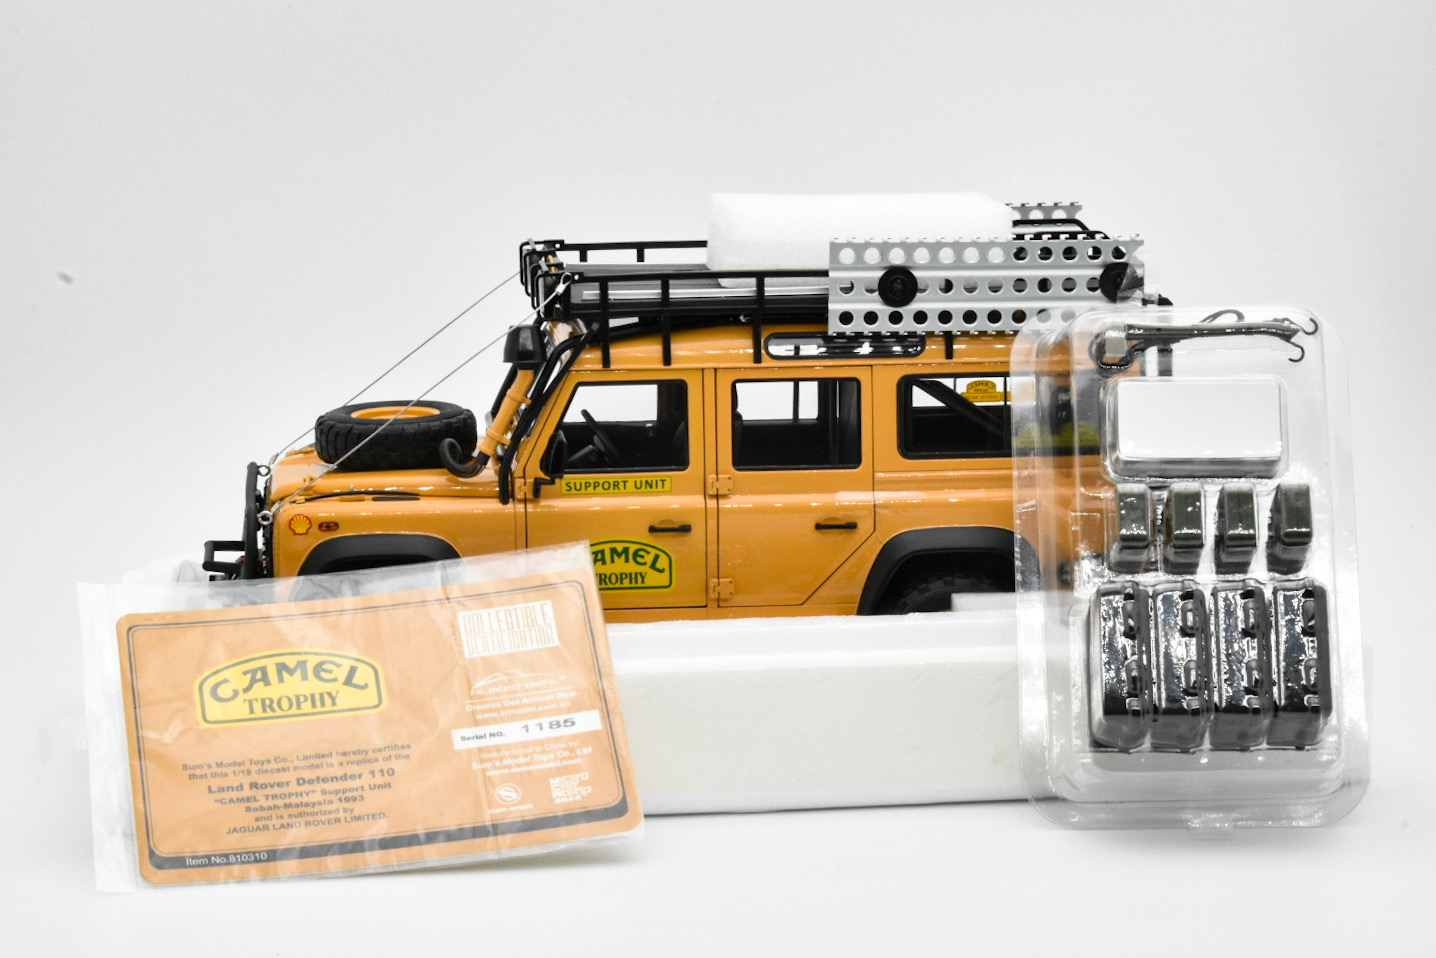 ALMOST REAL 1/43 ランドローバー ディフェンダー LAND Rover Defender 